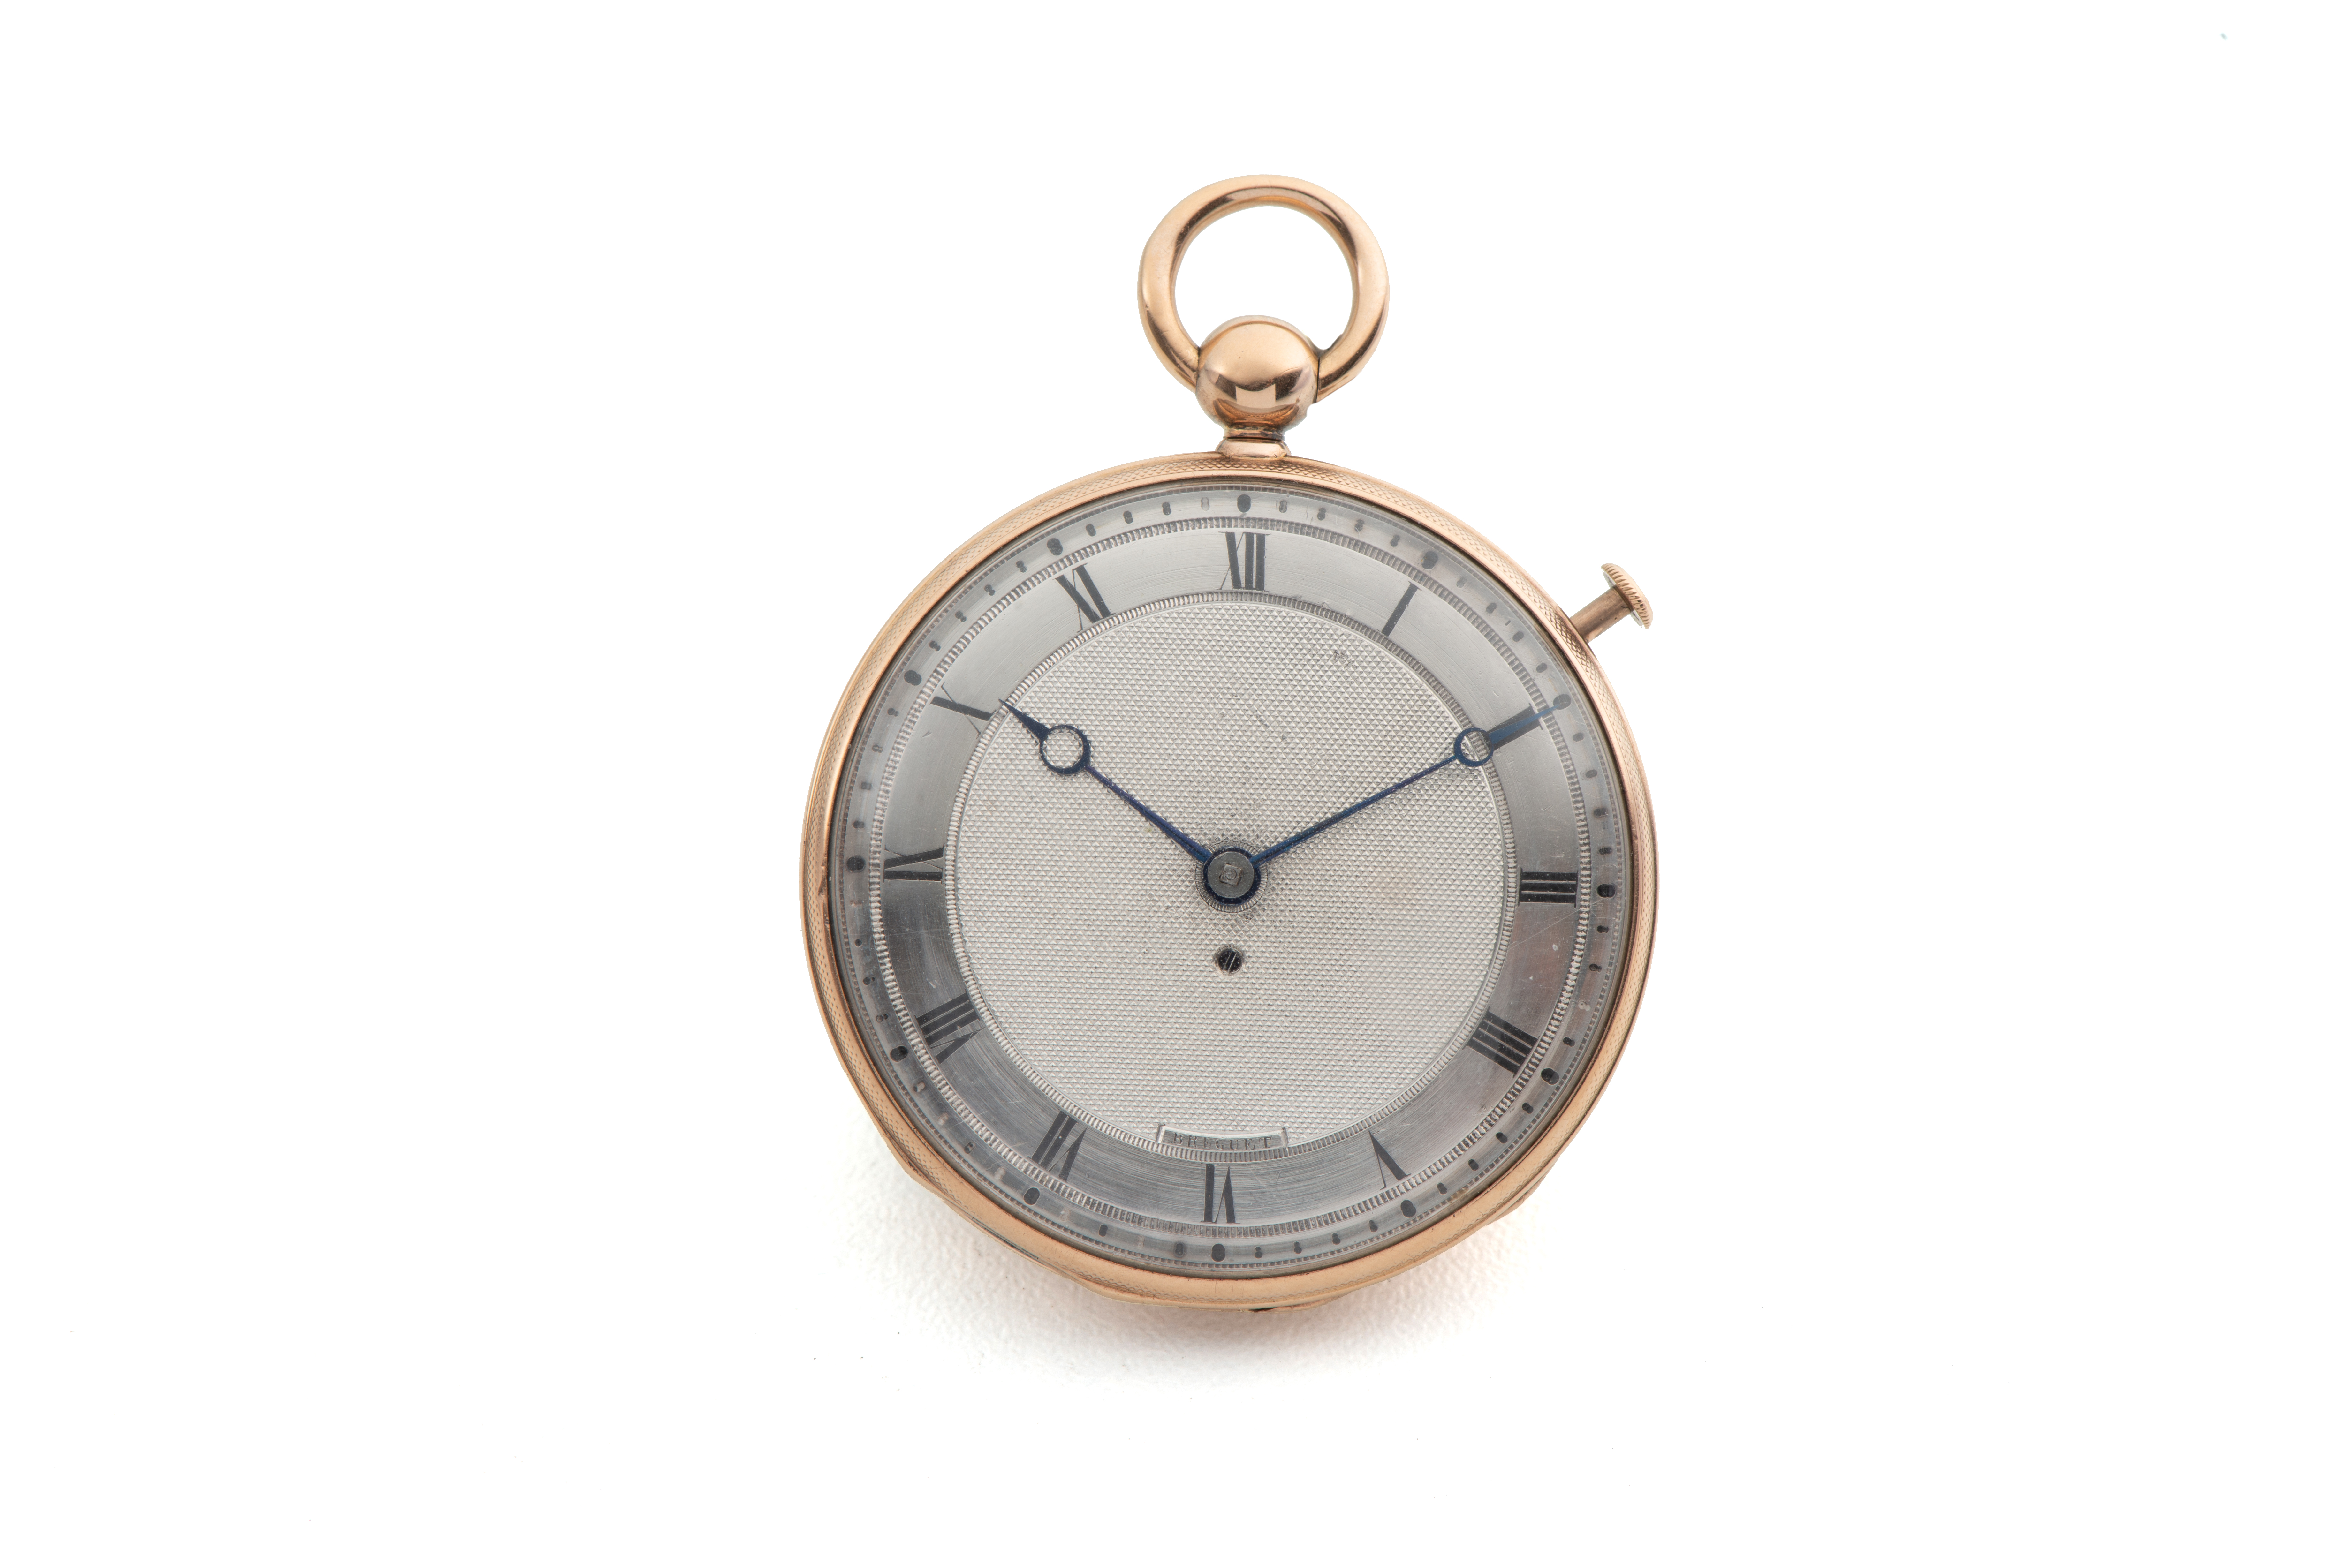 BREGUET, QUARTER REPEATER POCKET WATCH, YELLOW GOLD . Extremely fine and rare [...]